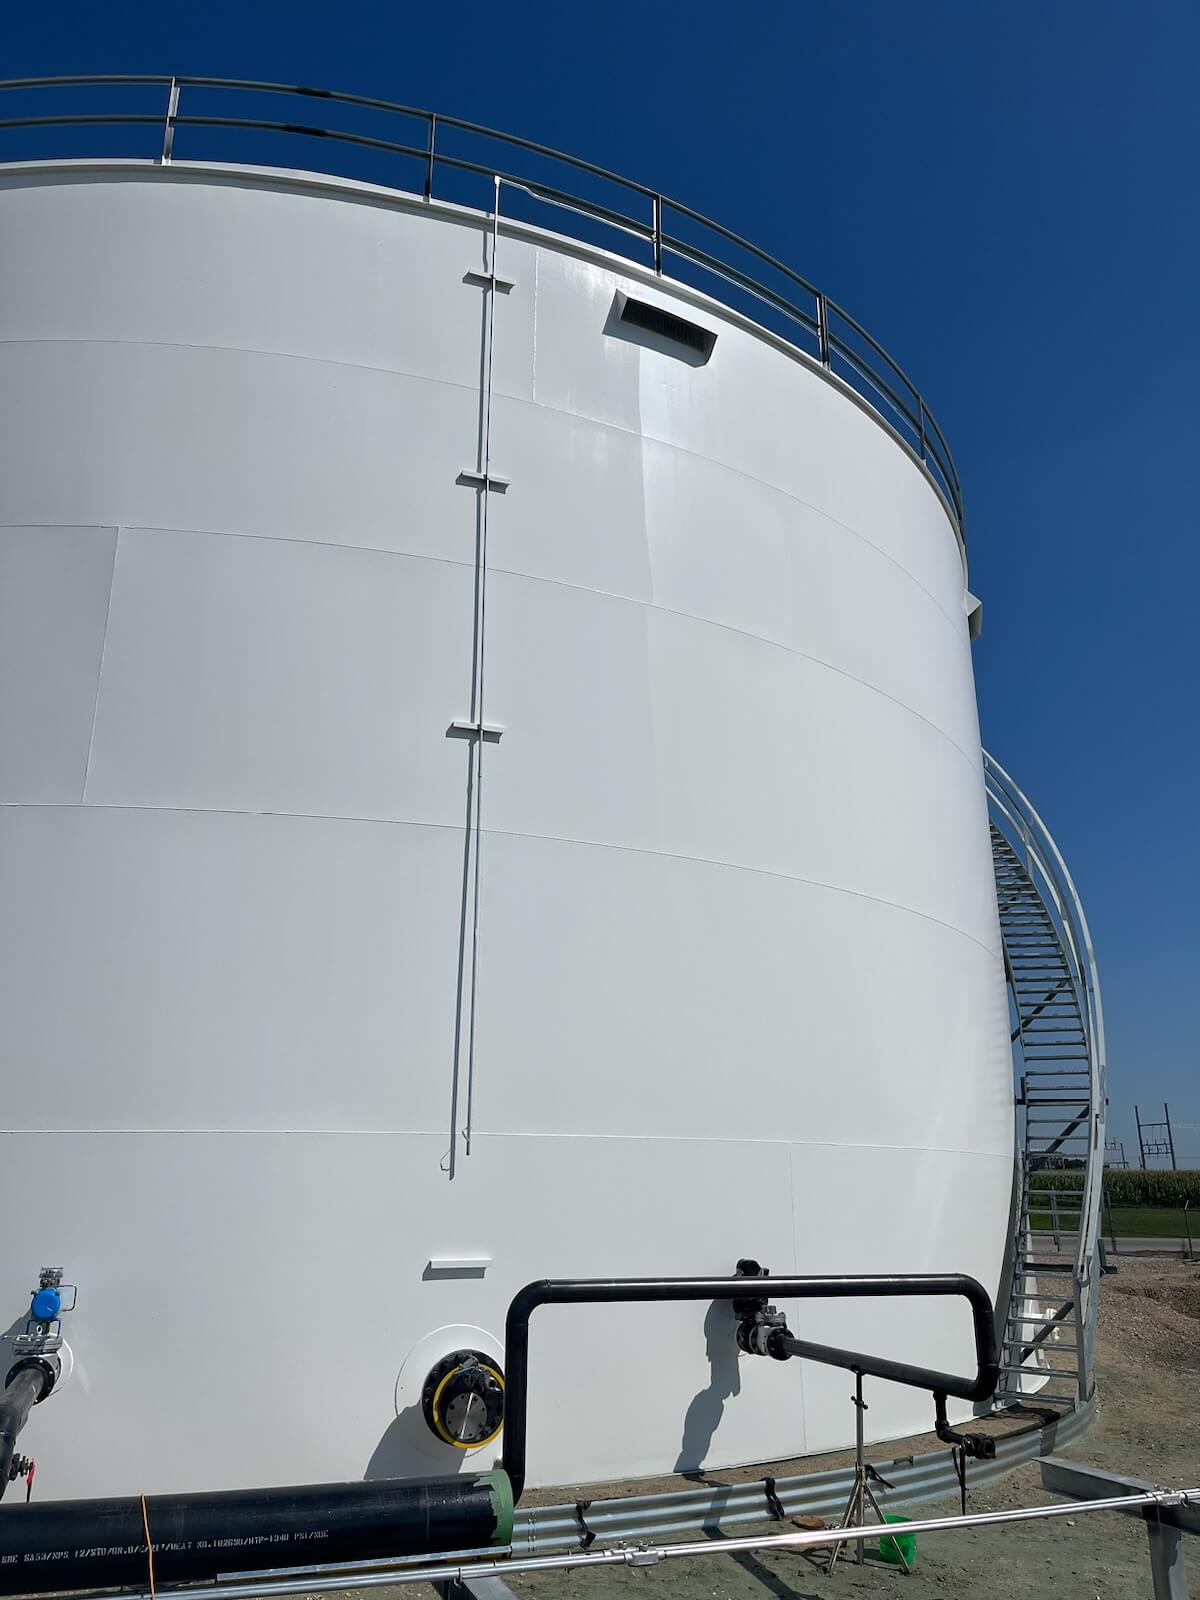 A newly constructed steel ethanol storage tank is seen after its exterior is coated in a siloxane topcoat that inhibits fungal growth.